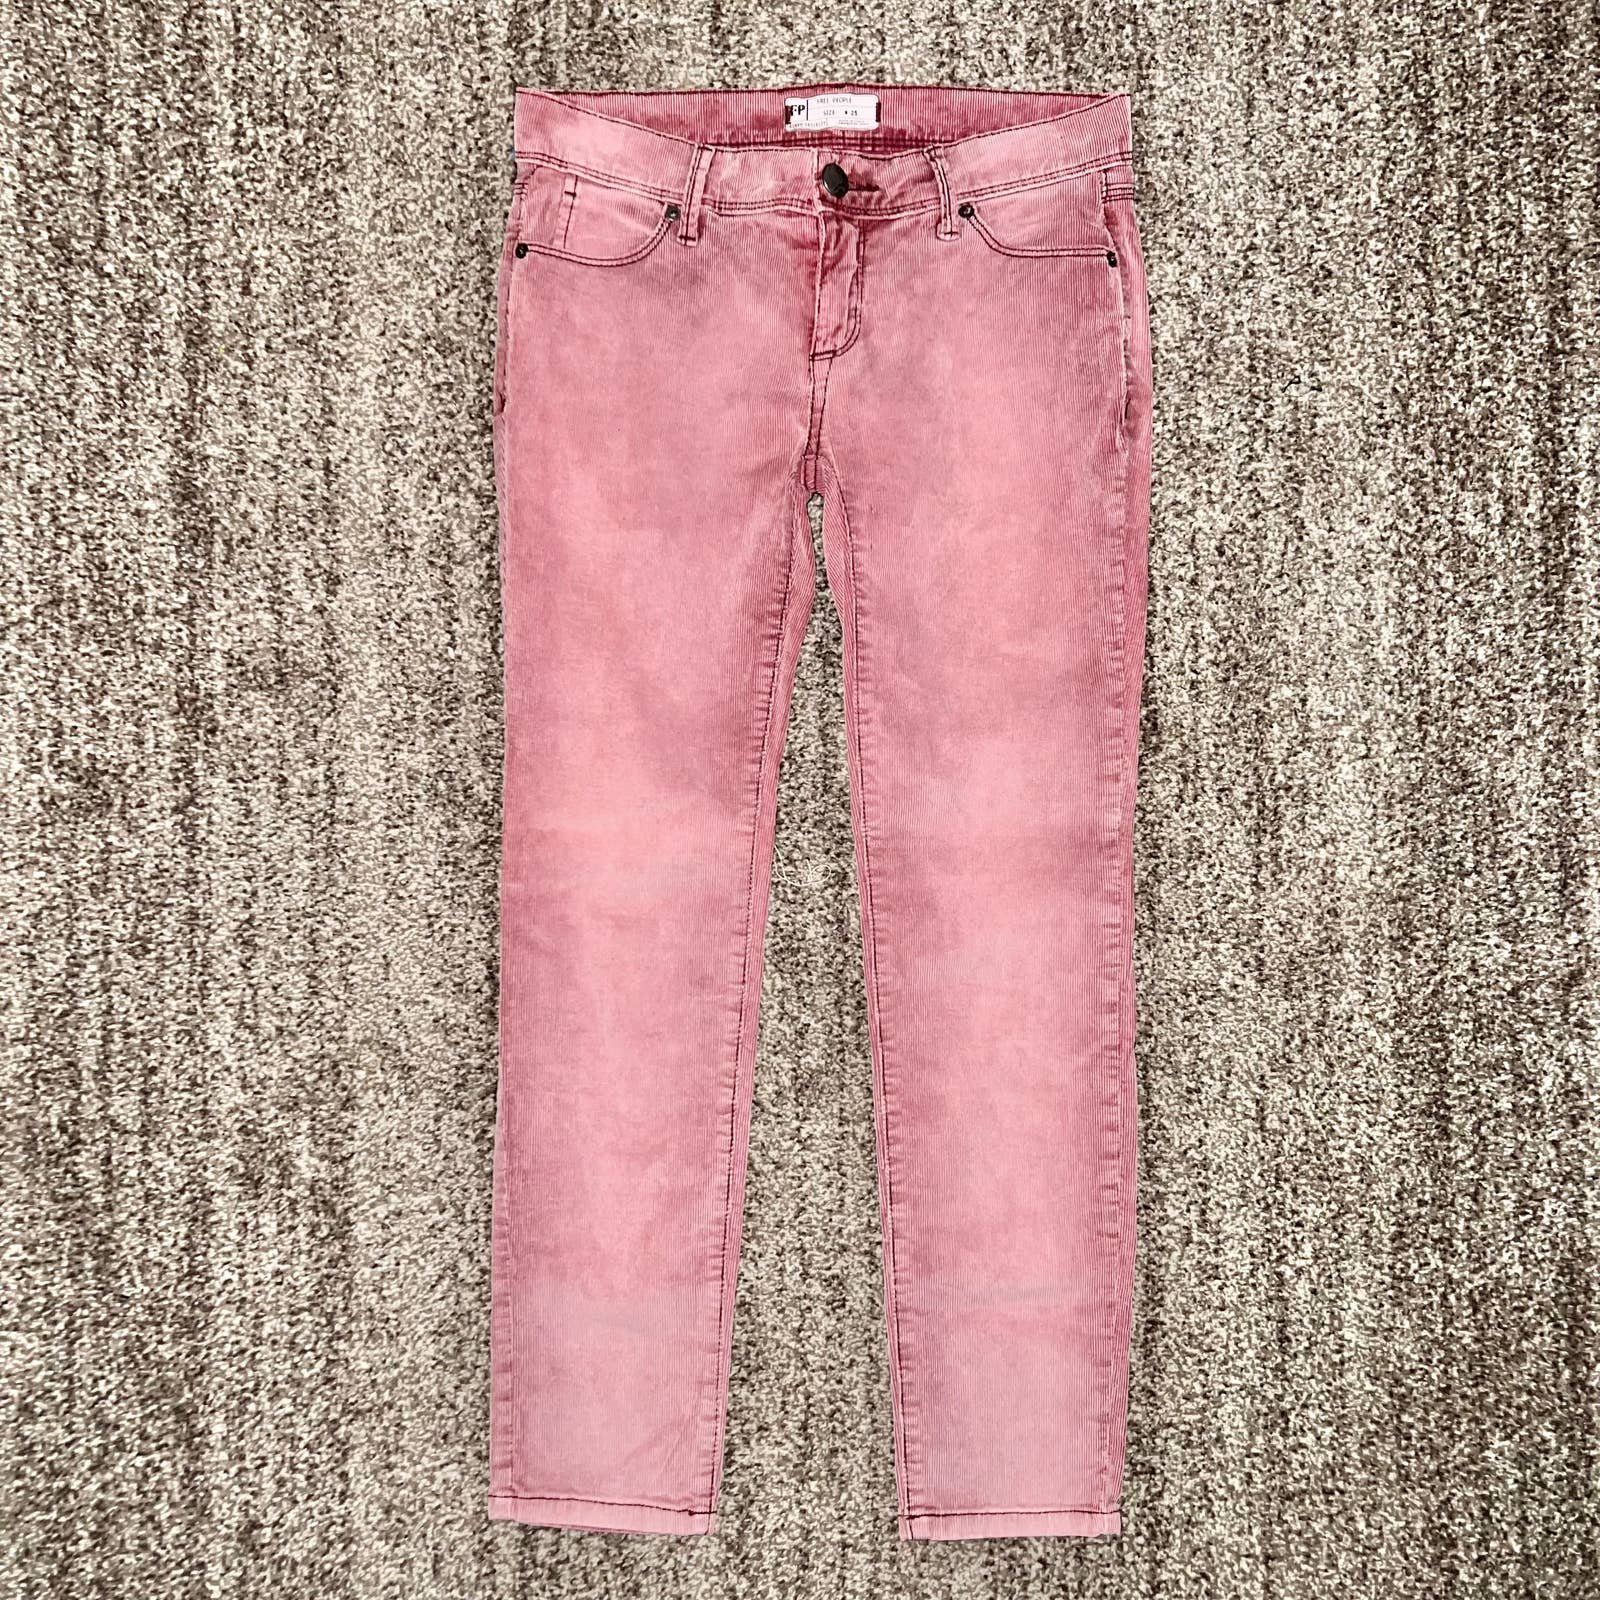 Amazing Free People Women´s Cord Roller Skinny Size 25 Washed Red Jeans mnuX5jwxR Low Price